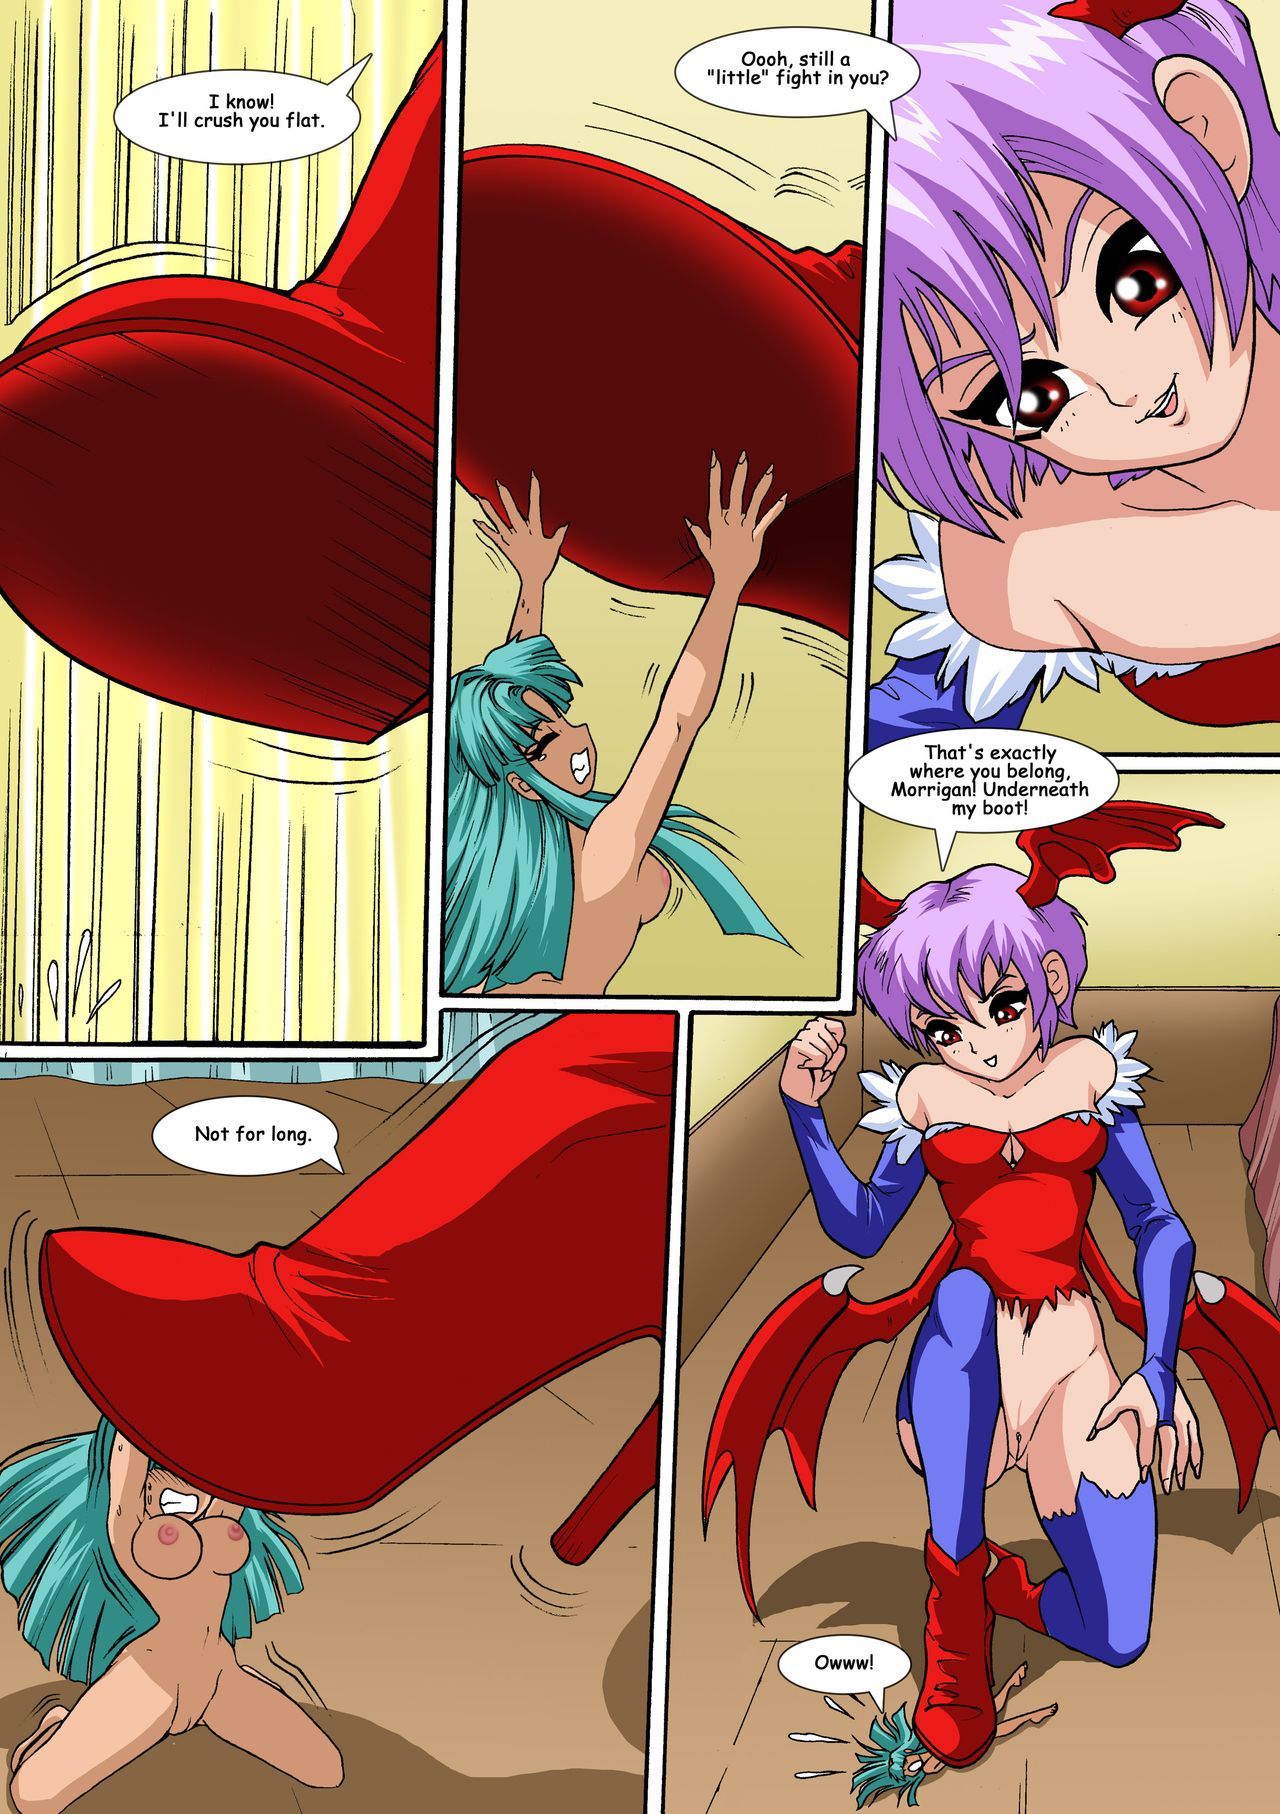 The Shrinking Succubus (Darkstalkers) by Palcomix page 16